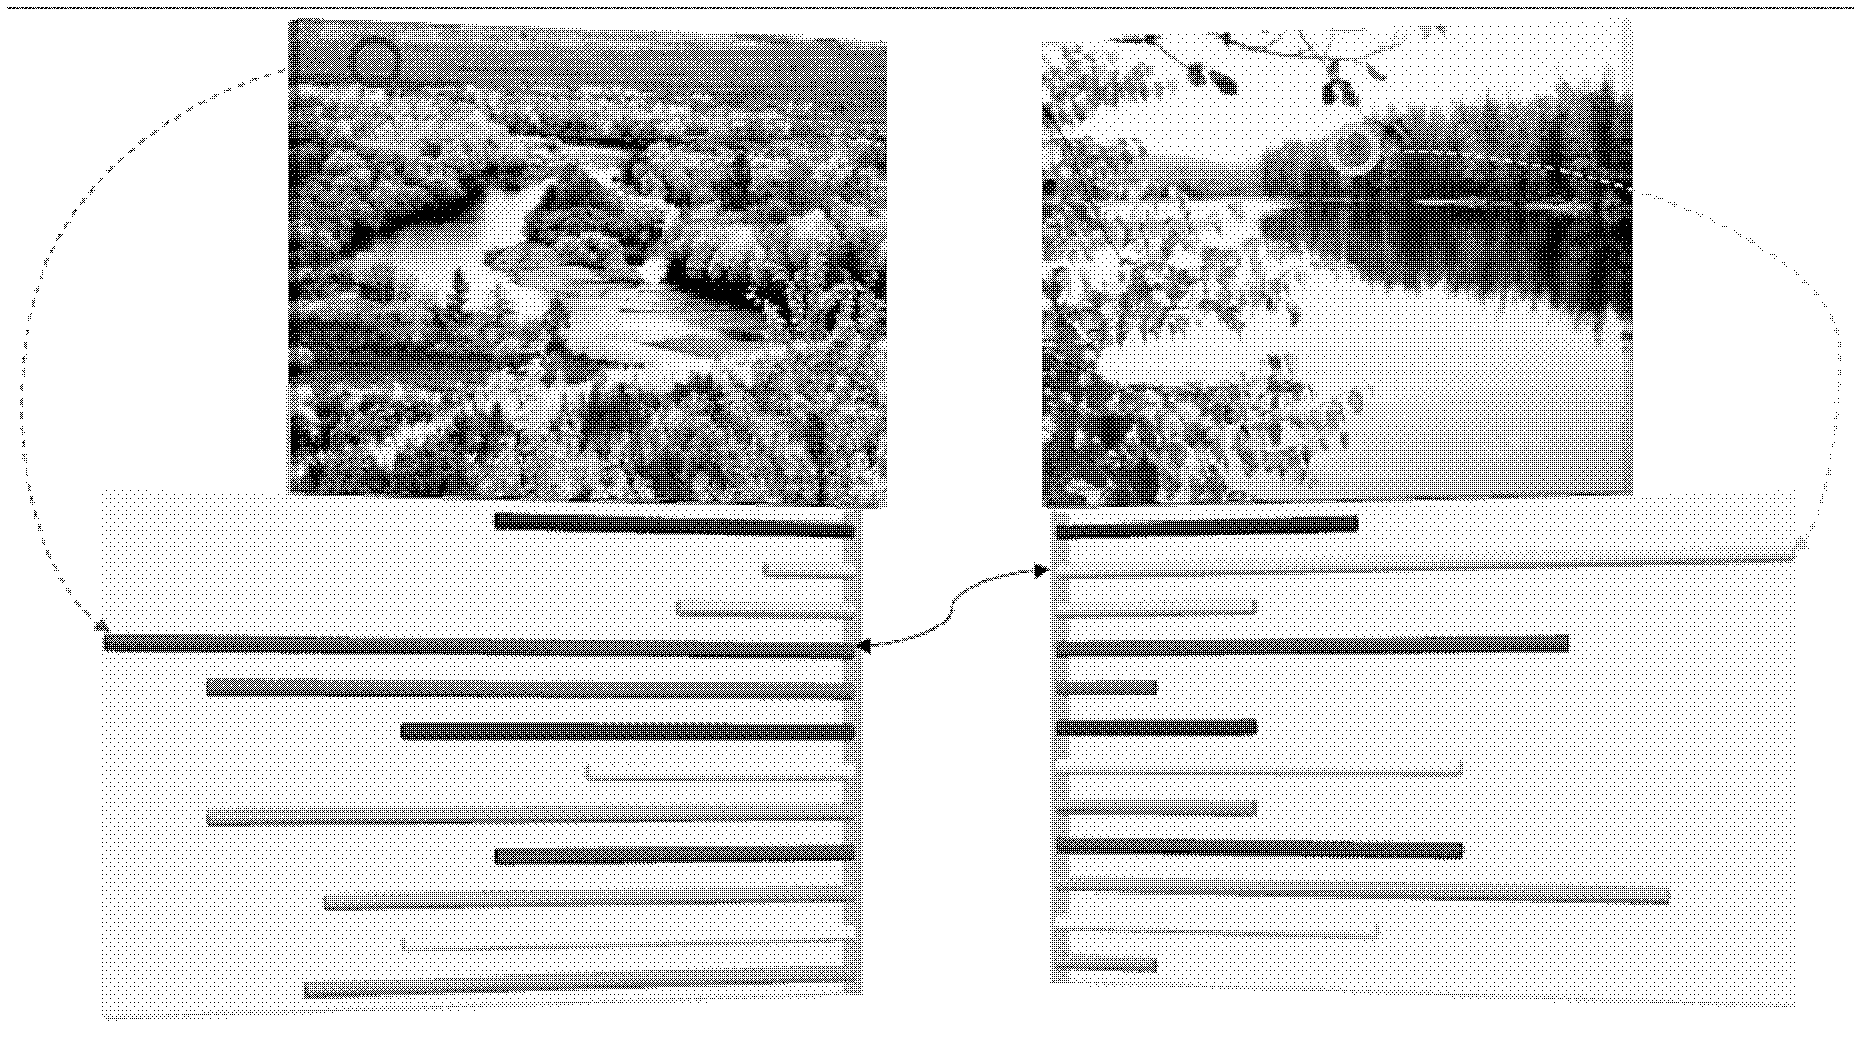 Color conversion and editing propagation-based method for enhancing seasonal feature of image